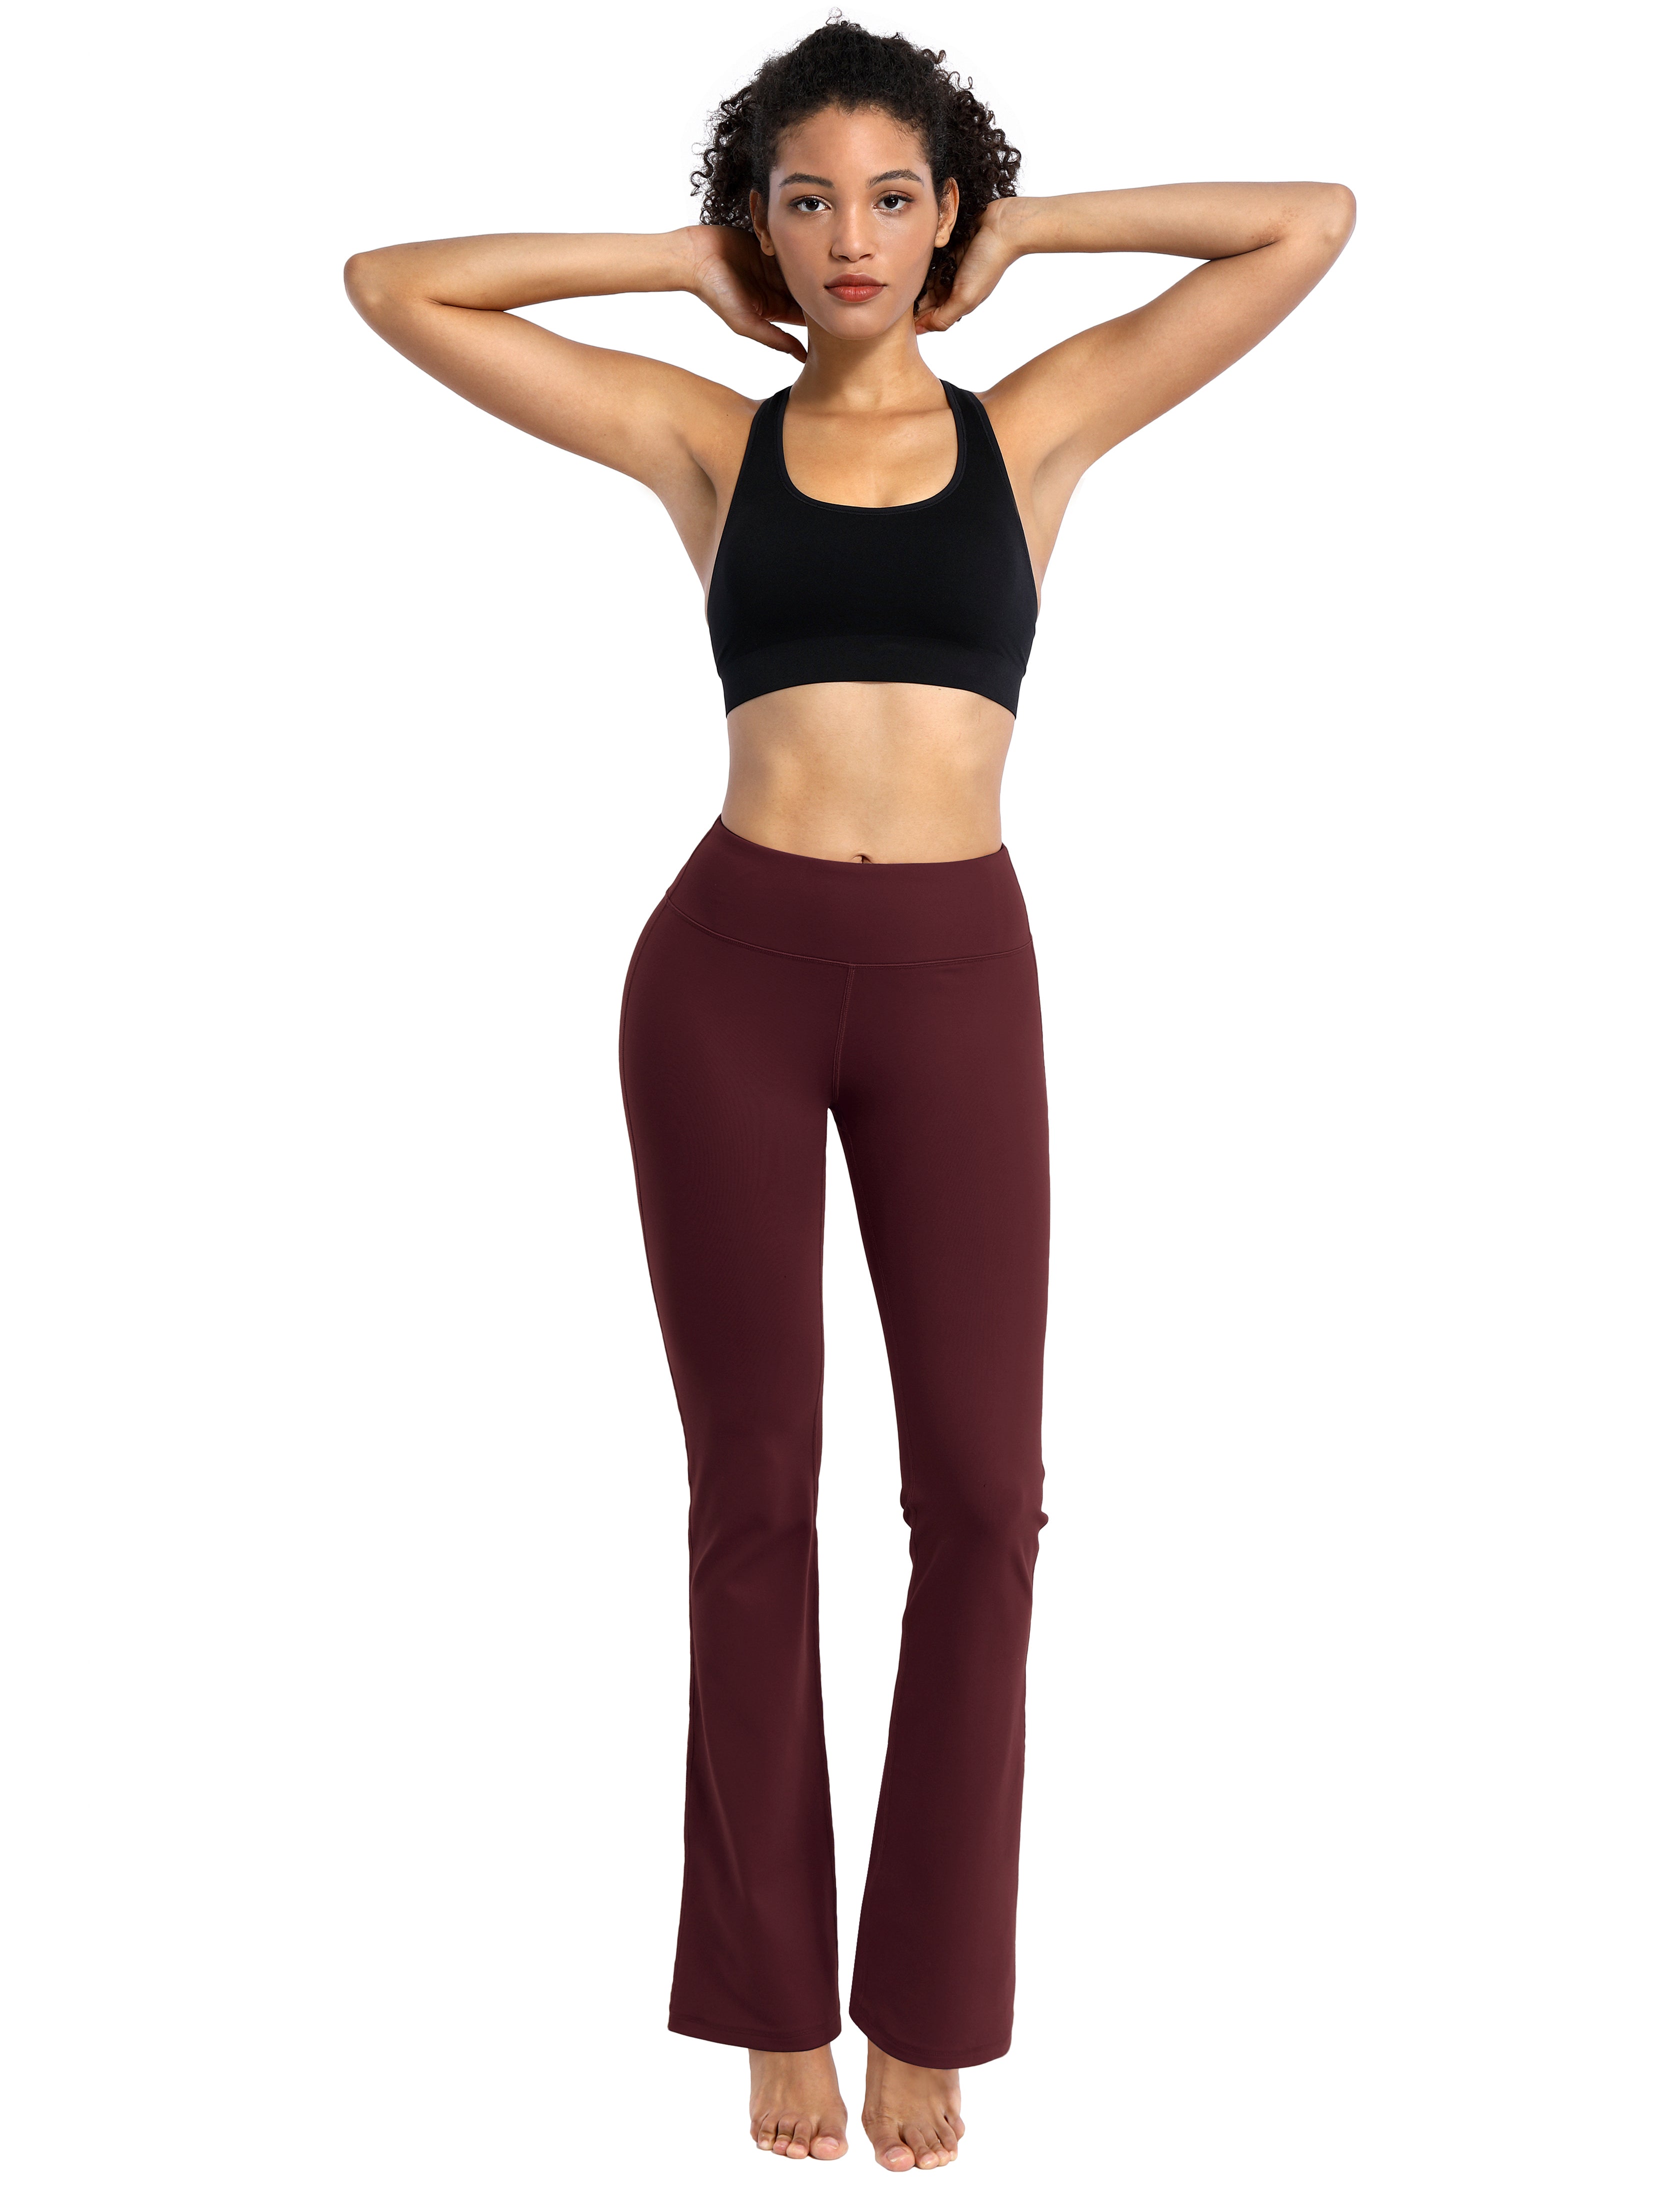 Cotton Nylon Bootcut Leggings cherryred 87%Nylon/13%Spandex (Super soft, cotton feel , 280gsm) Fabric doesn't attract lint easily 4-way stretch No see-through Moisture-wicking Inner pocket Four lengths